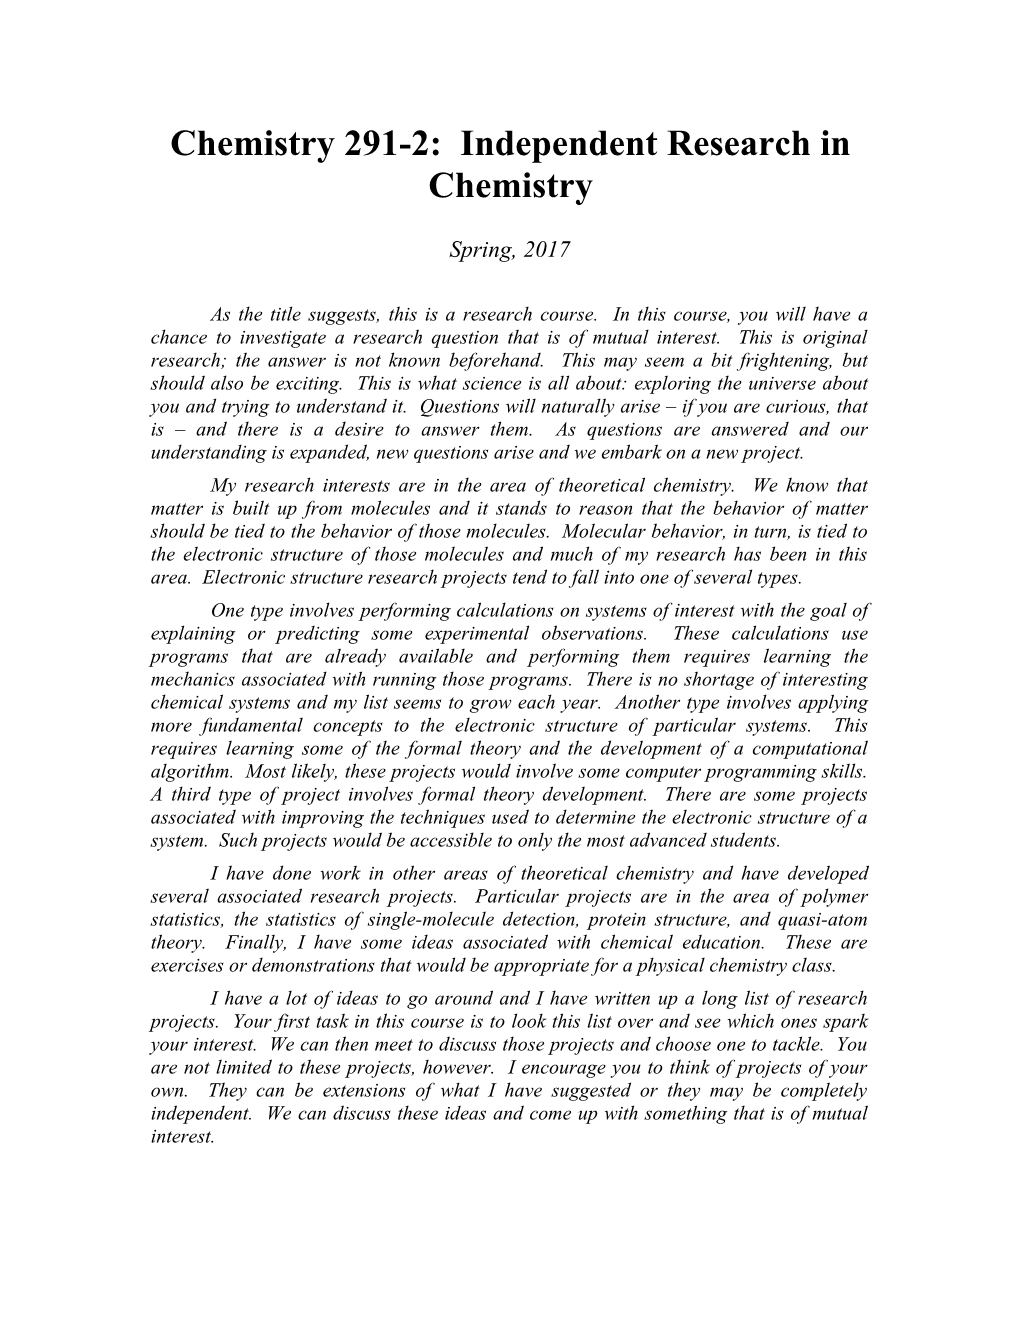 Chemistry 343: Atomic Structure